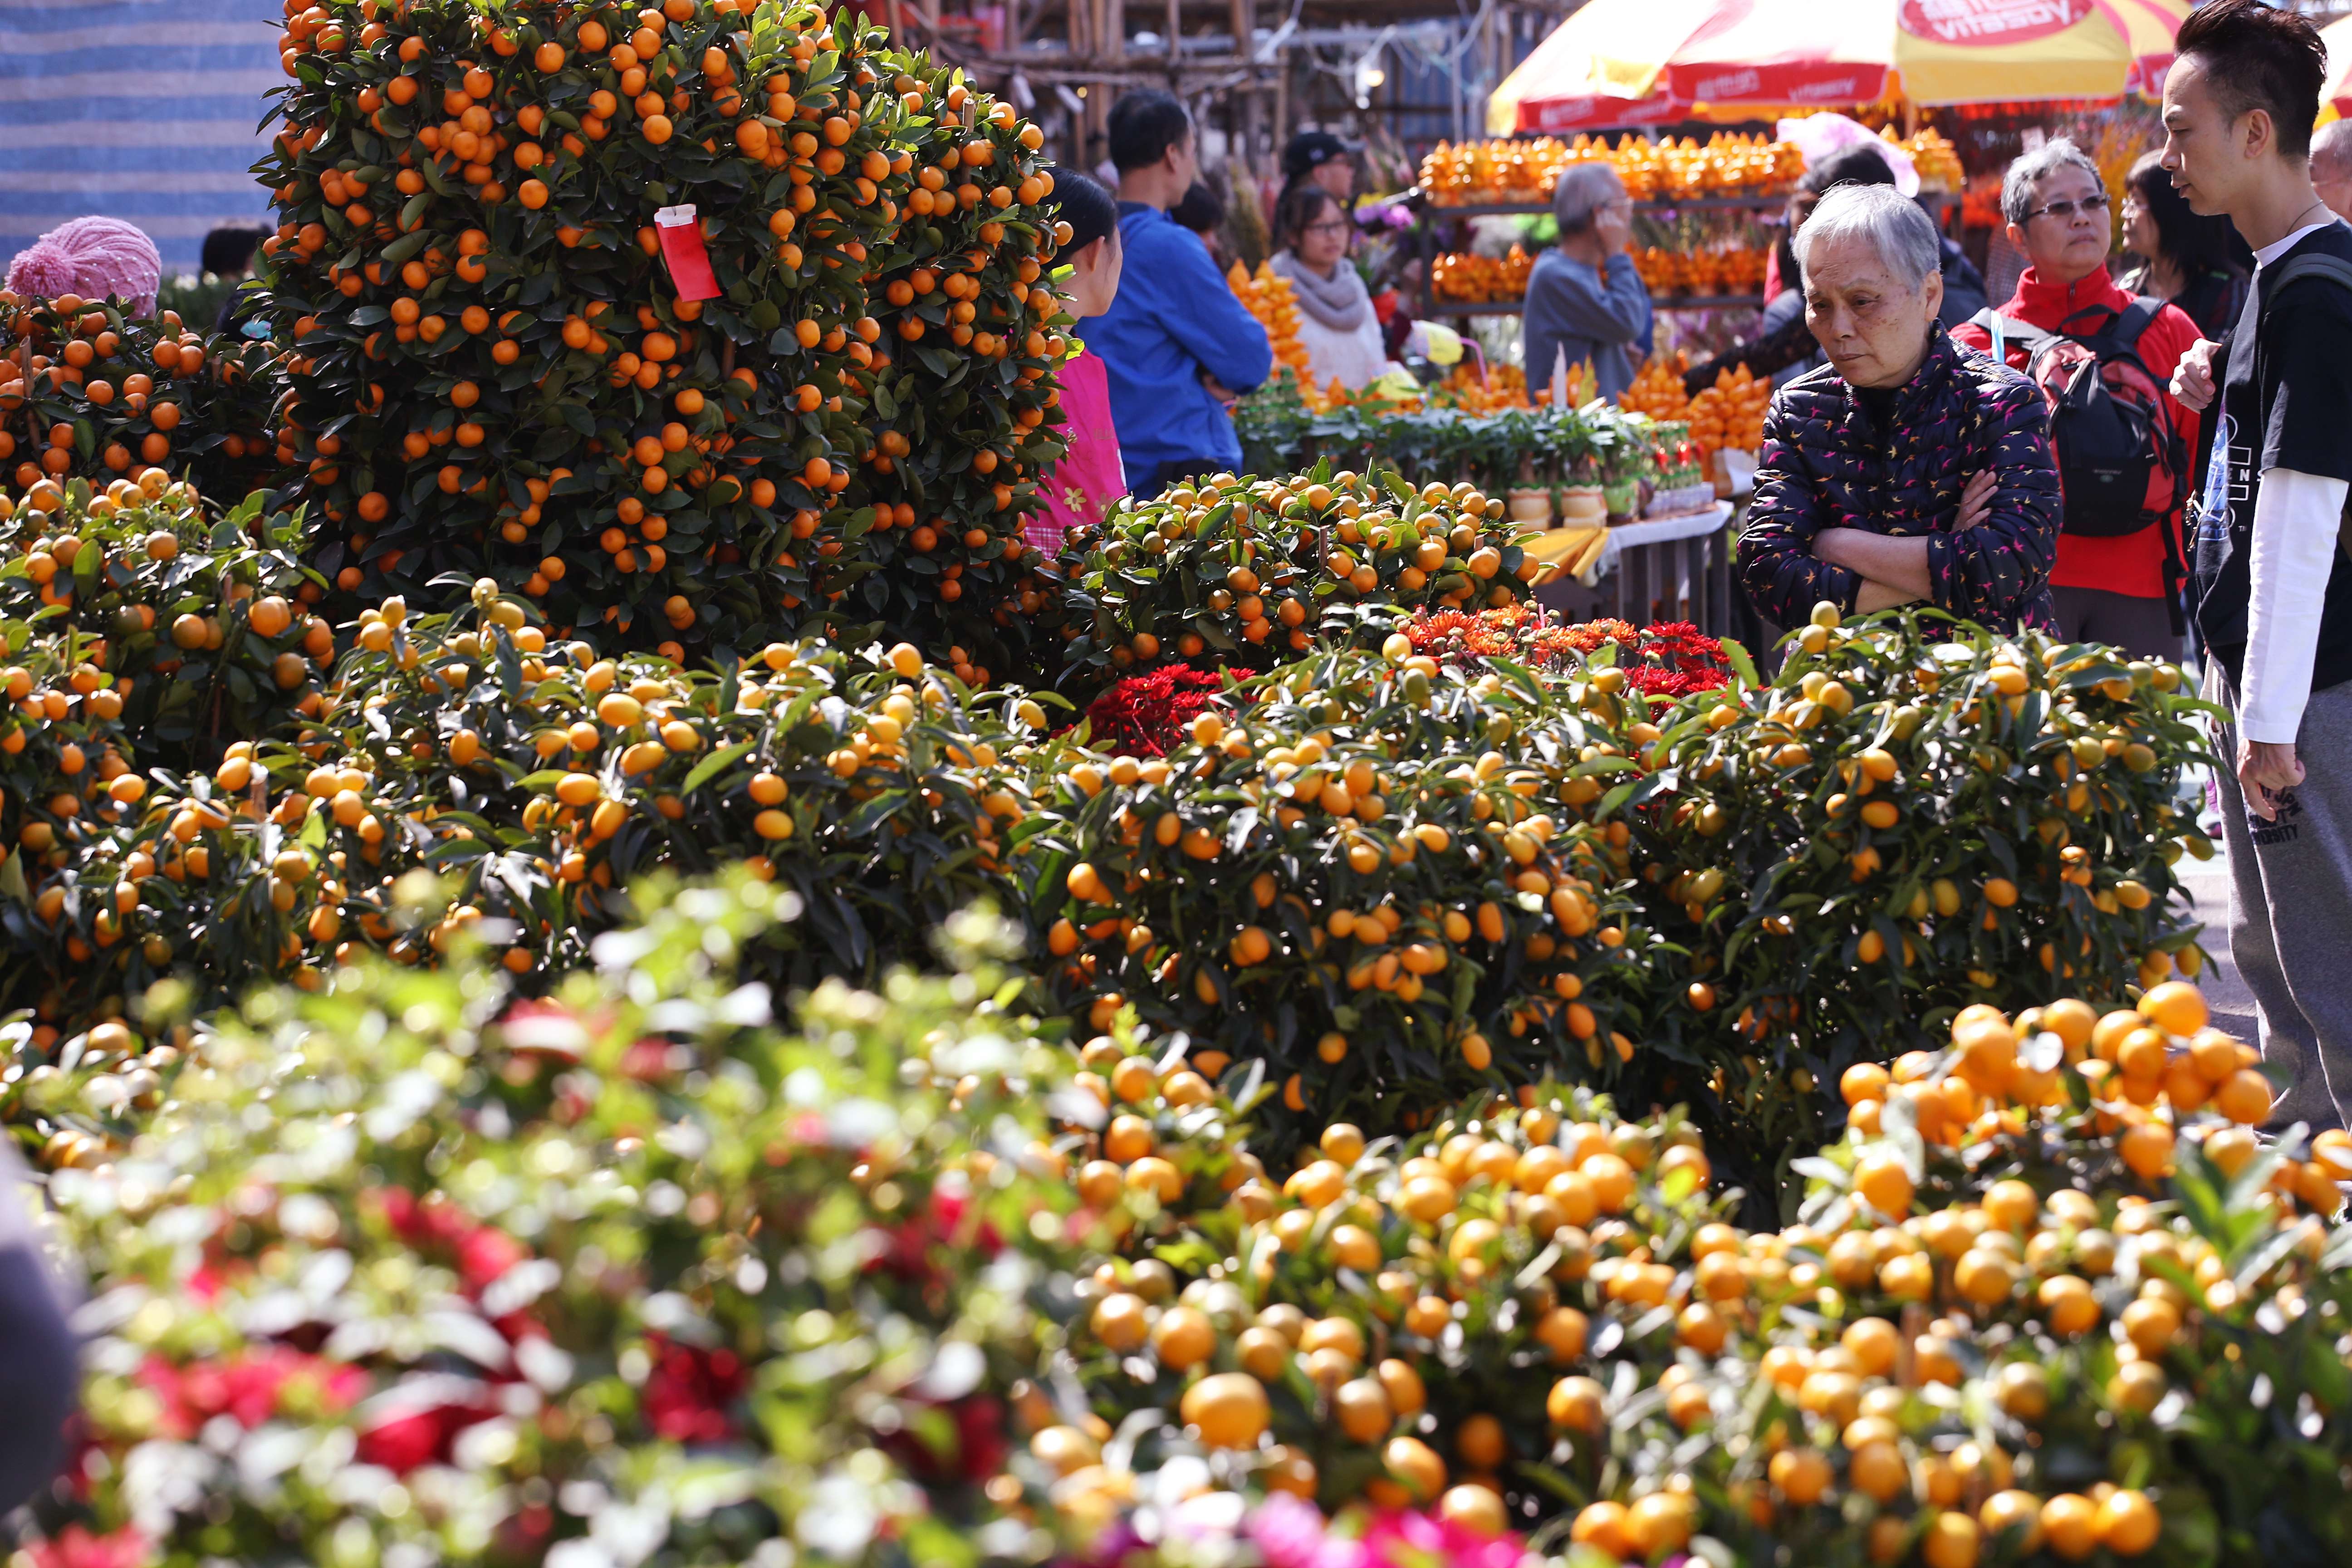 Visitors choose from row upon row of kumquat trees at the New Year Fair in Victoria Park, on January 22. Photo: Felix Wong